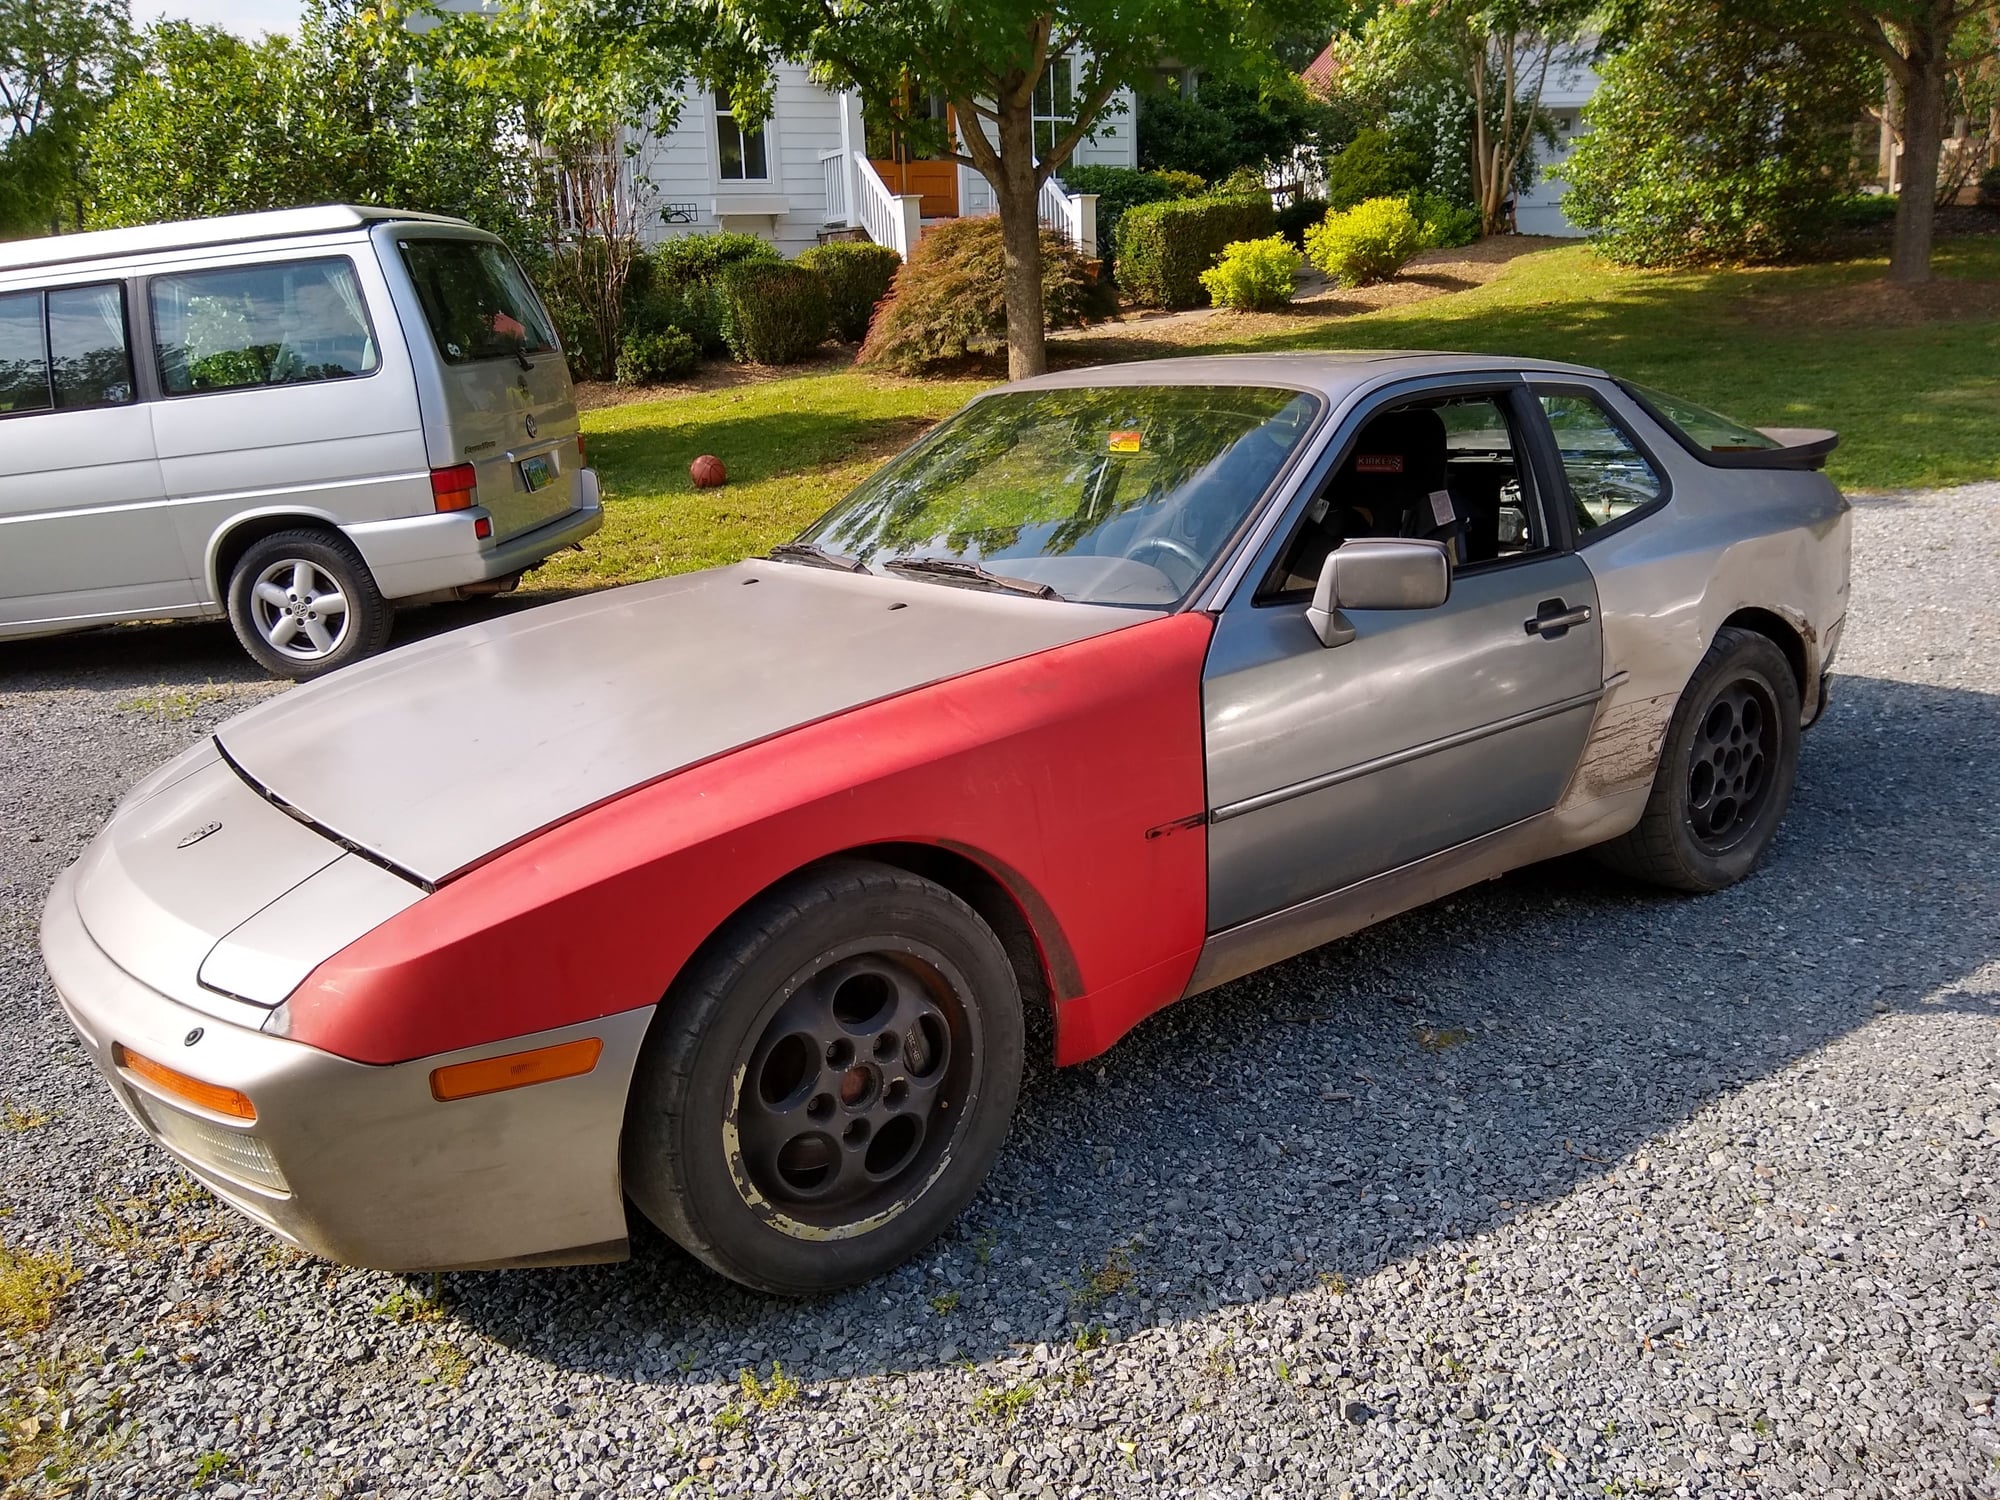 1988 Porsche 944 - 944 turbo S track car - Used - VIN 4444444444 - 106 Miles - 4 cyl - 2WD - Manual - Coupe - Silver - Purcellville, VA 20132, United States